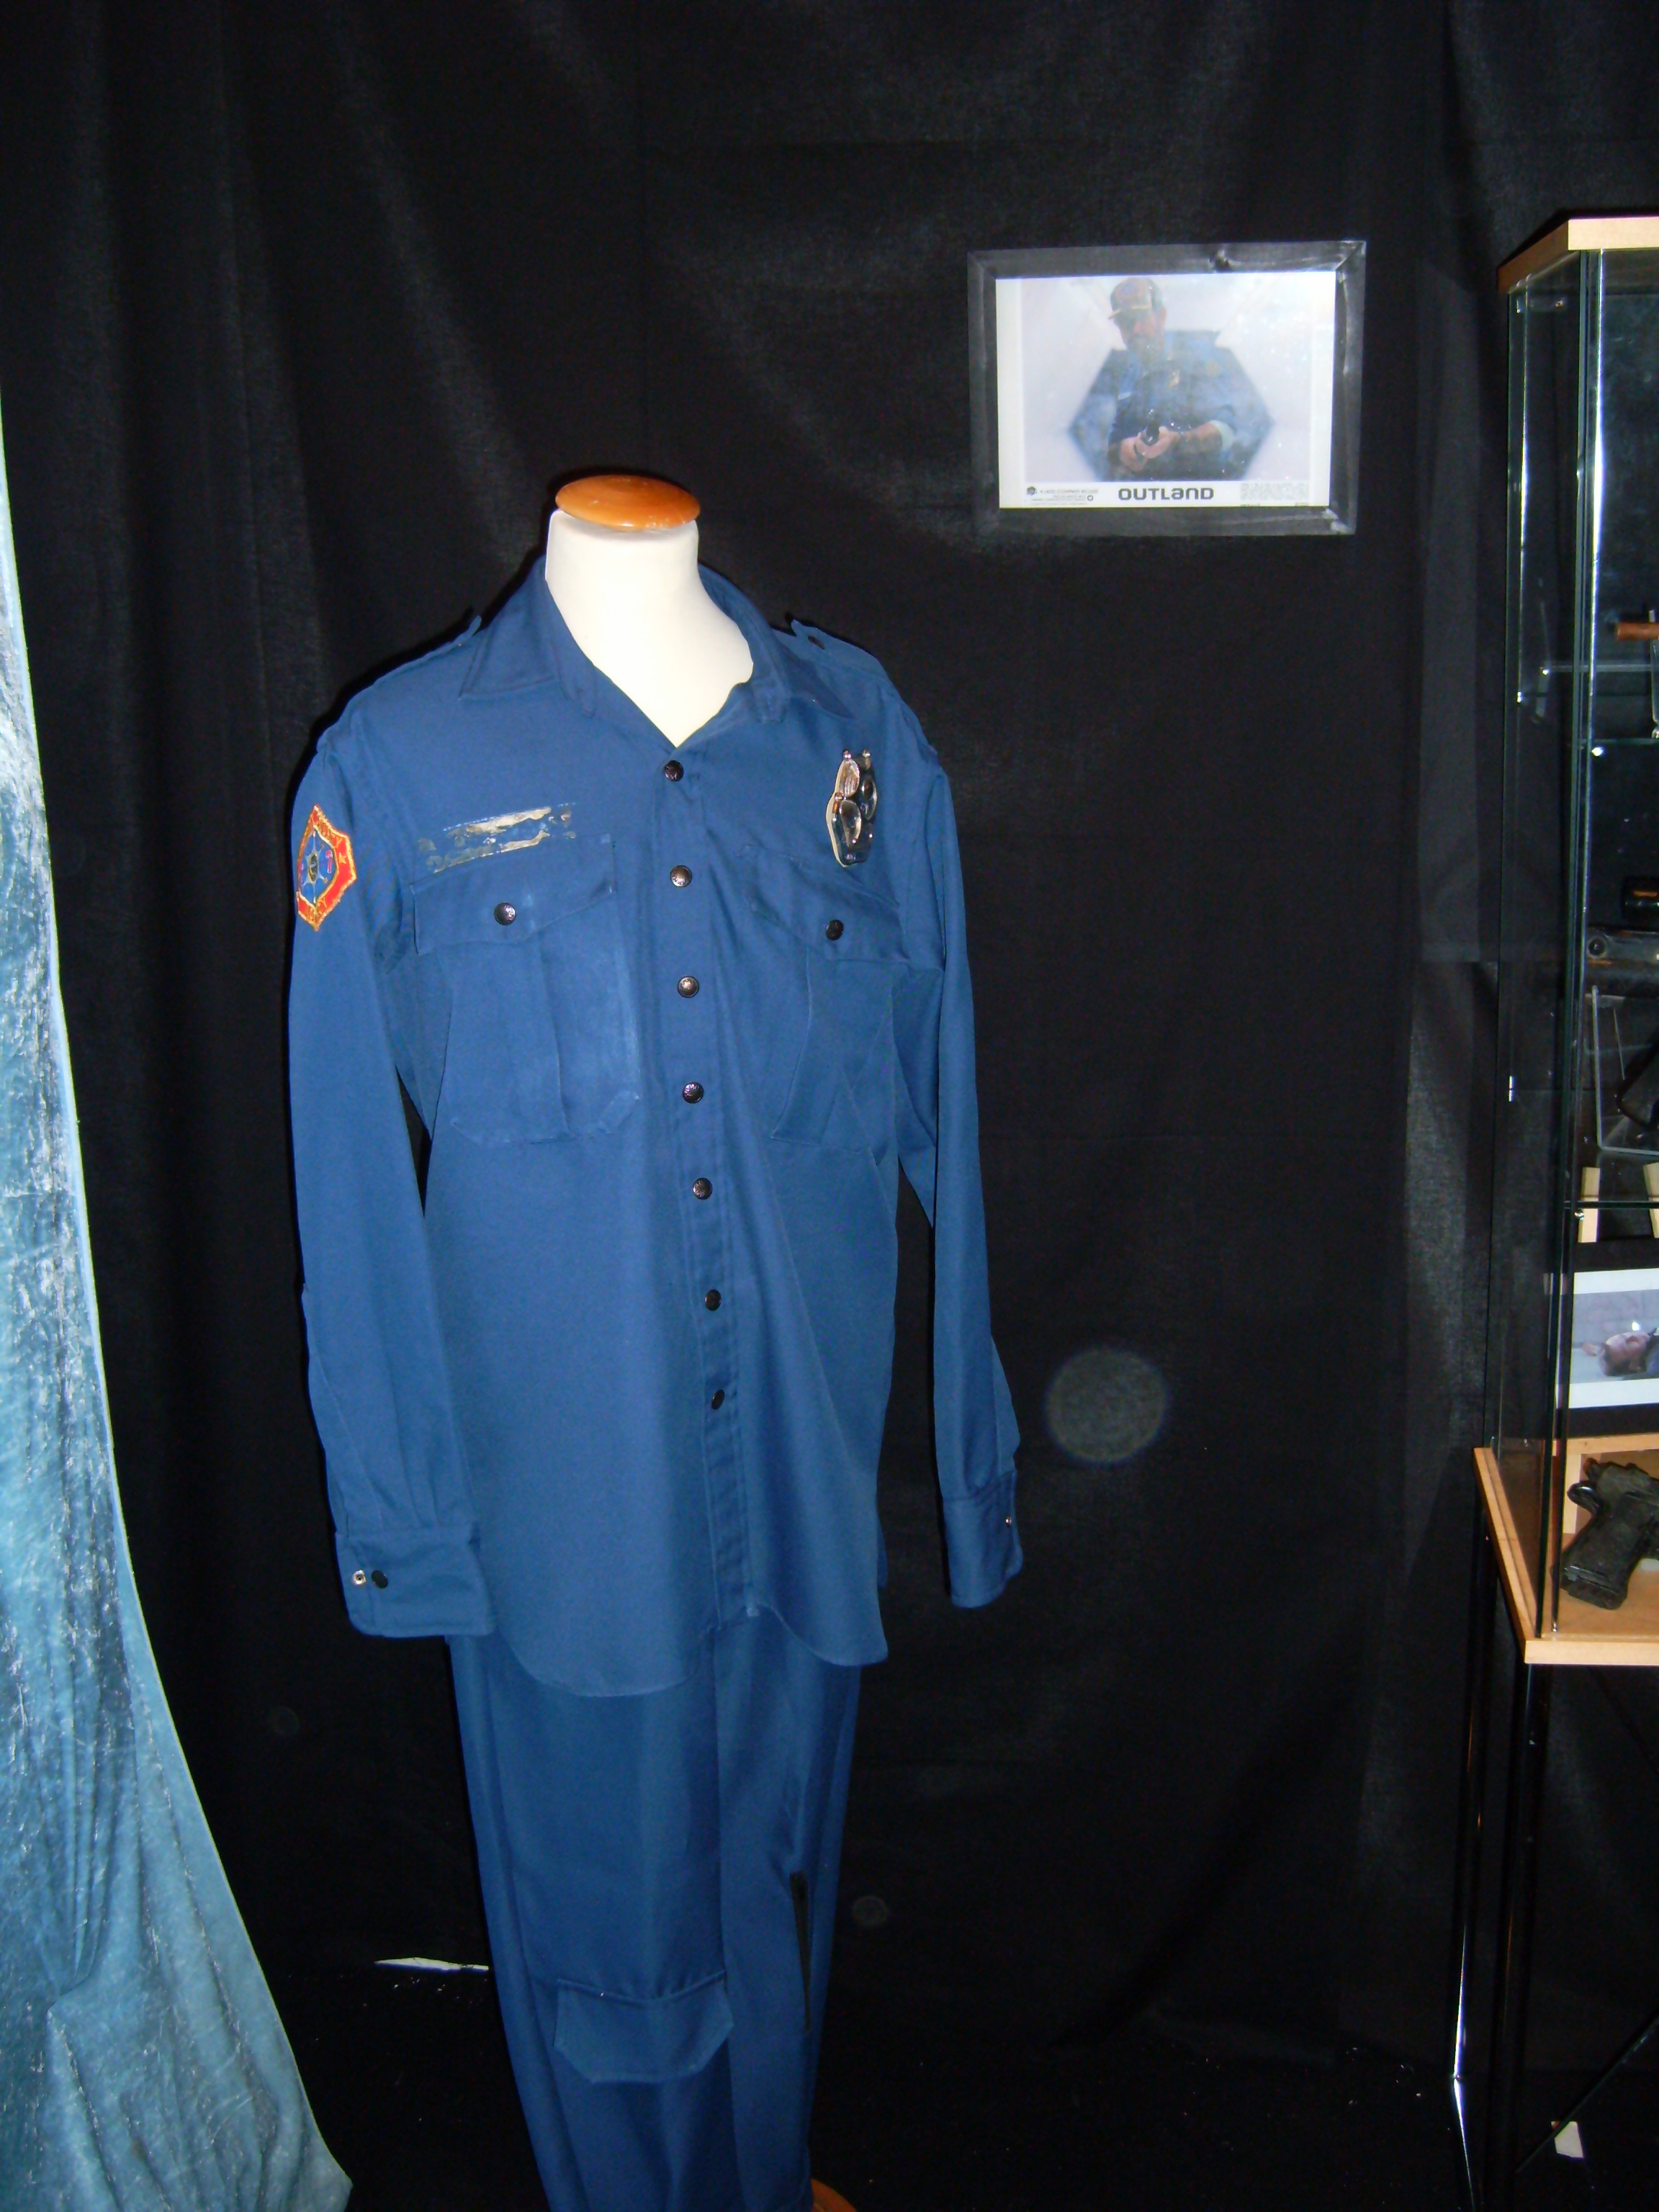 Wikipedia, Film costumes, Outland (film), Photographs taken on 2010-11-27, Science fiction costumes,